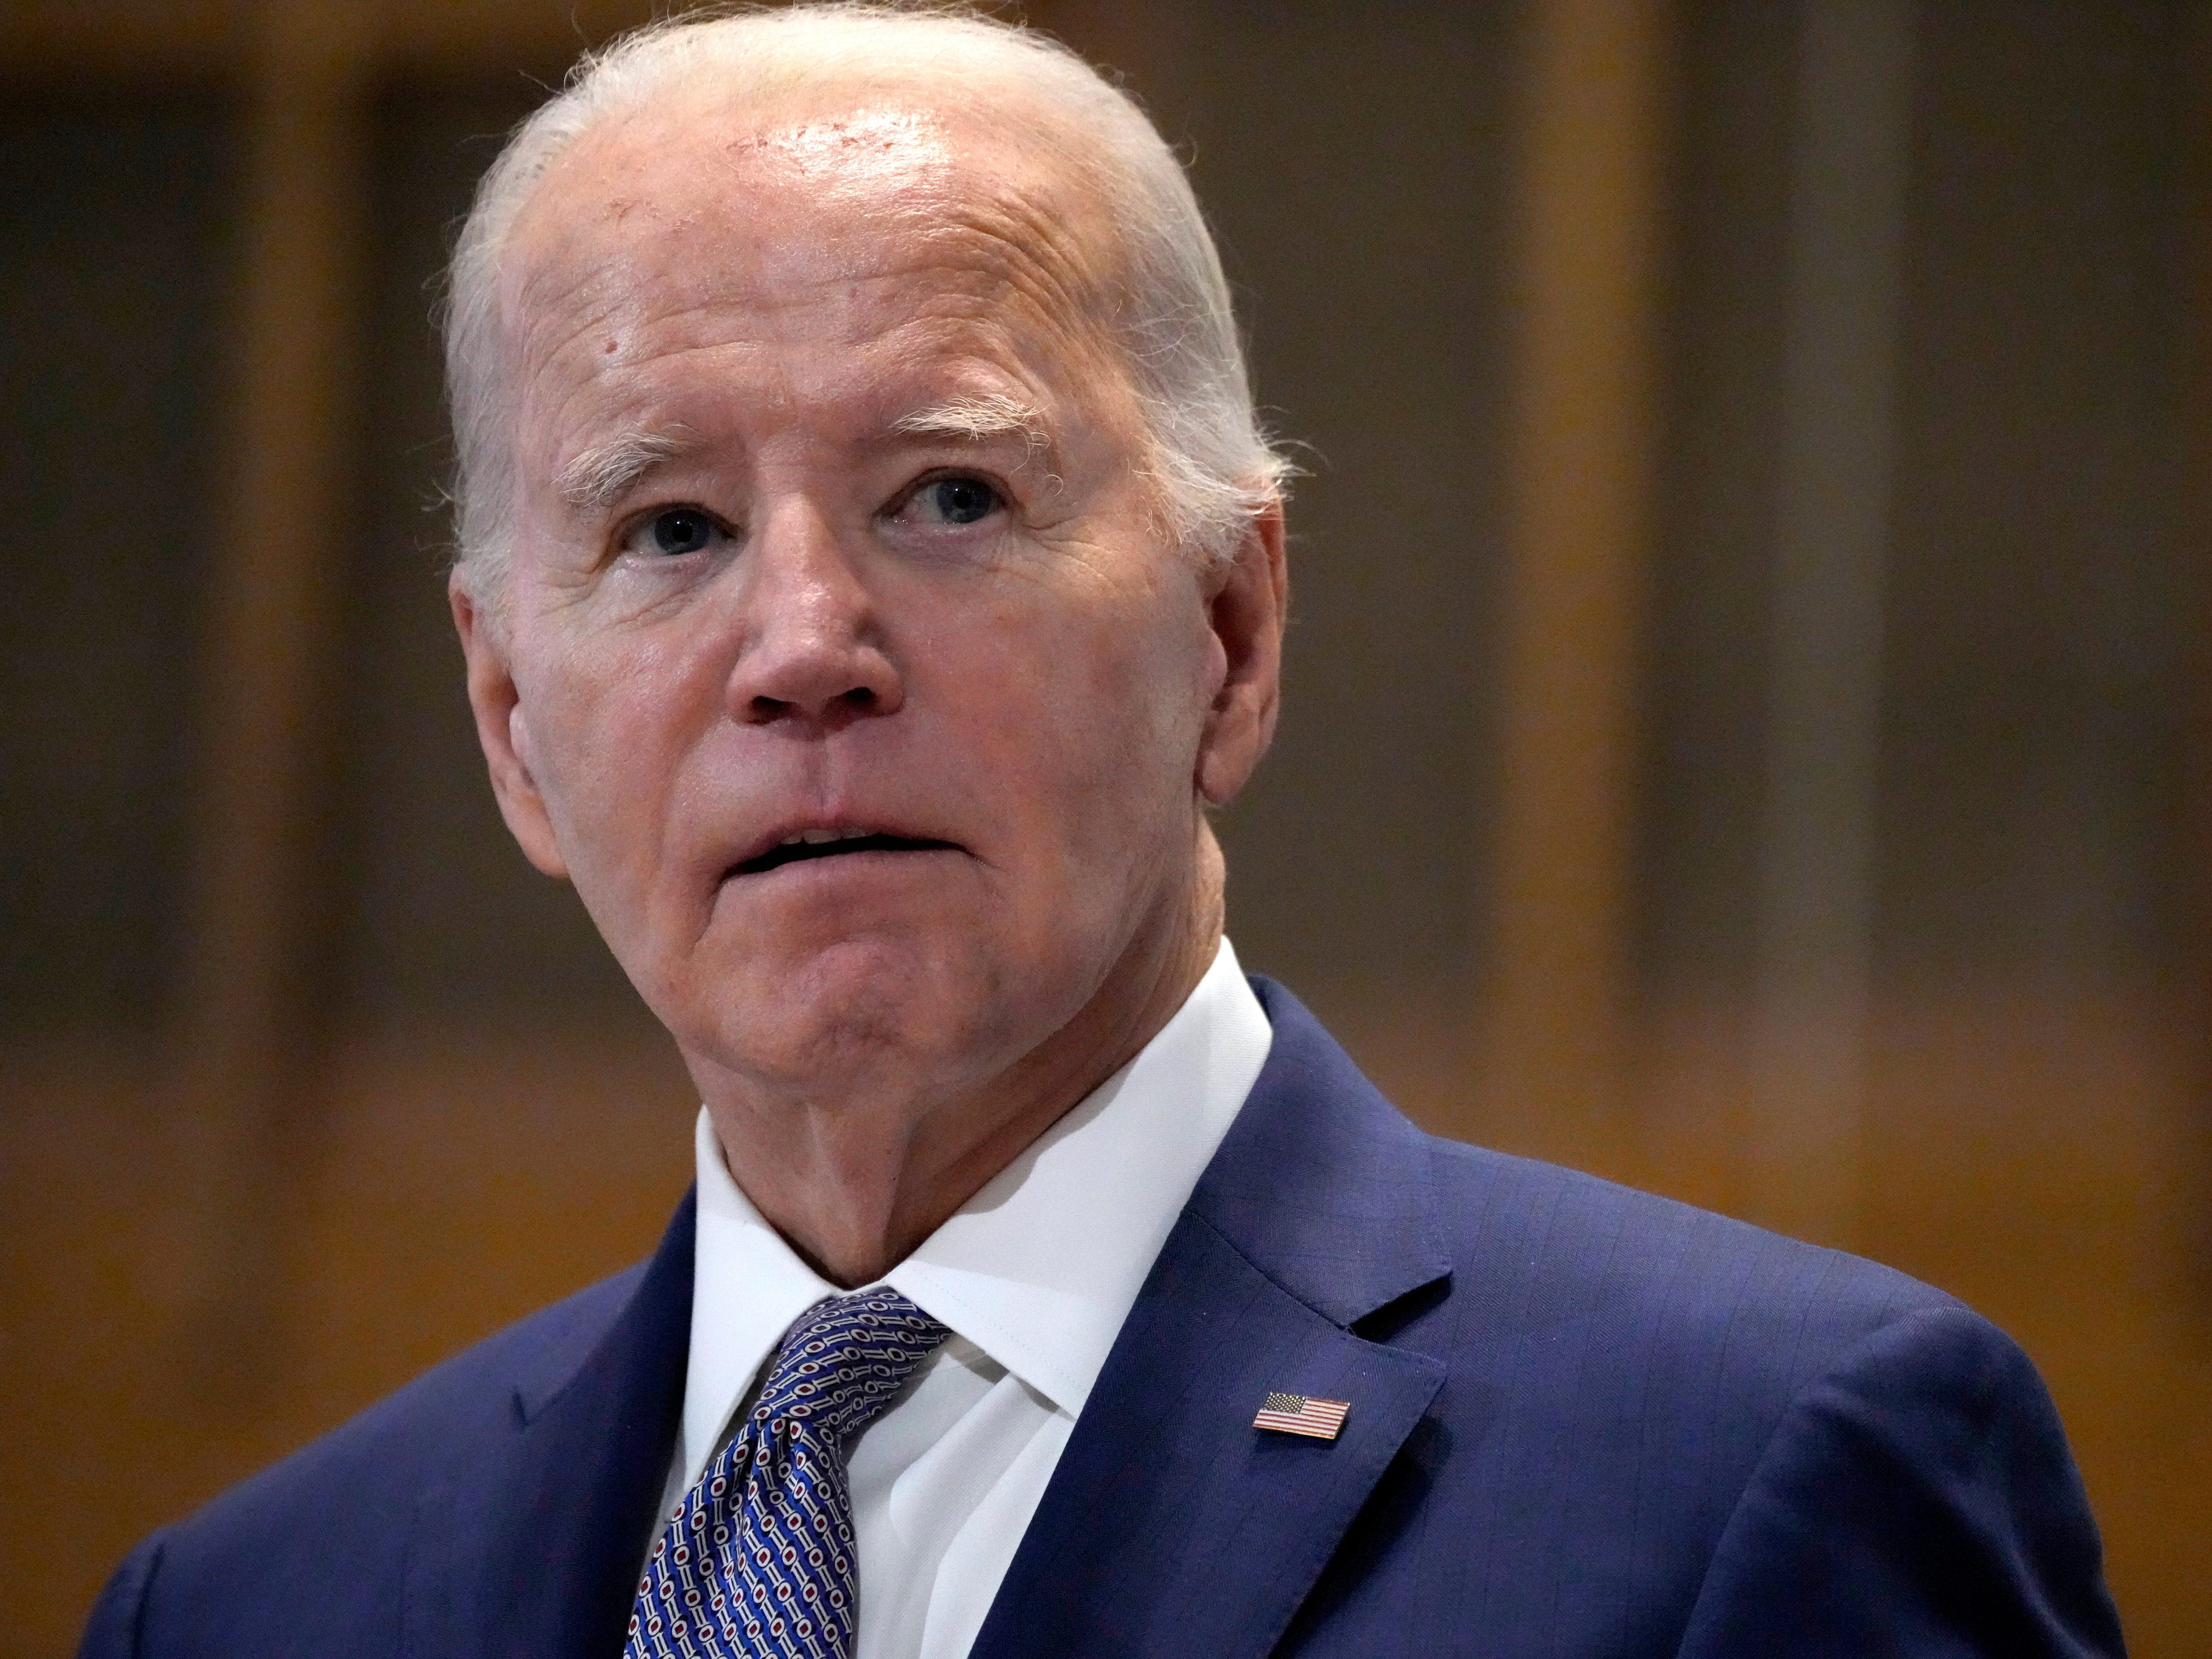 Israel gave Biden his worst news yet: the war in Gaza could last past the election